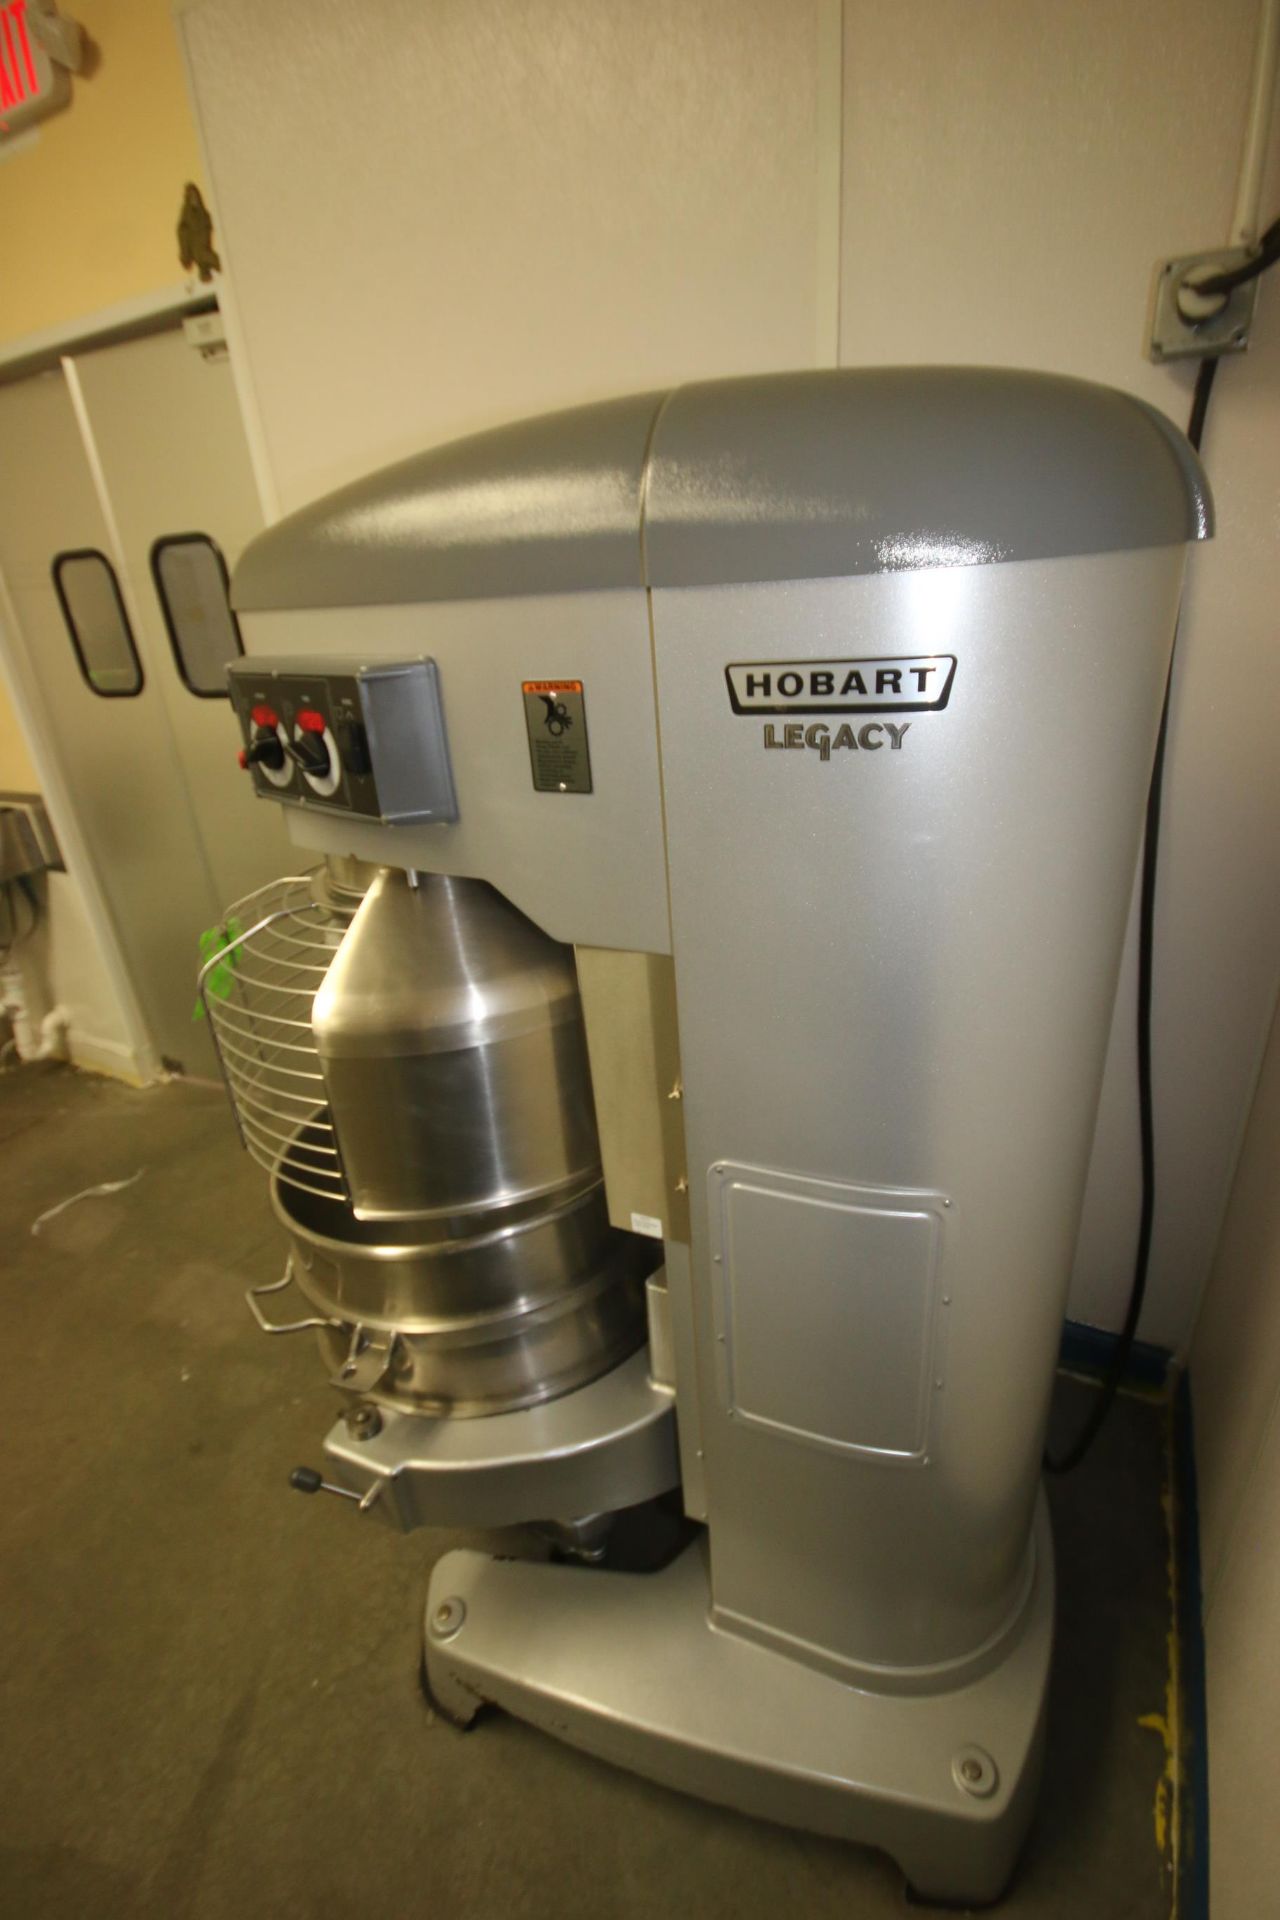 Hobart Legacy Mixer, M/N HL1400, S/N 31-1499-829, with 5 hp Motor, 1200 RPM, 200-240 Volts, 3 Phase, - Image 7 of 10